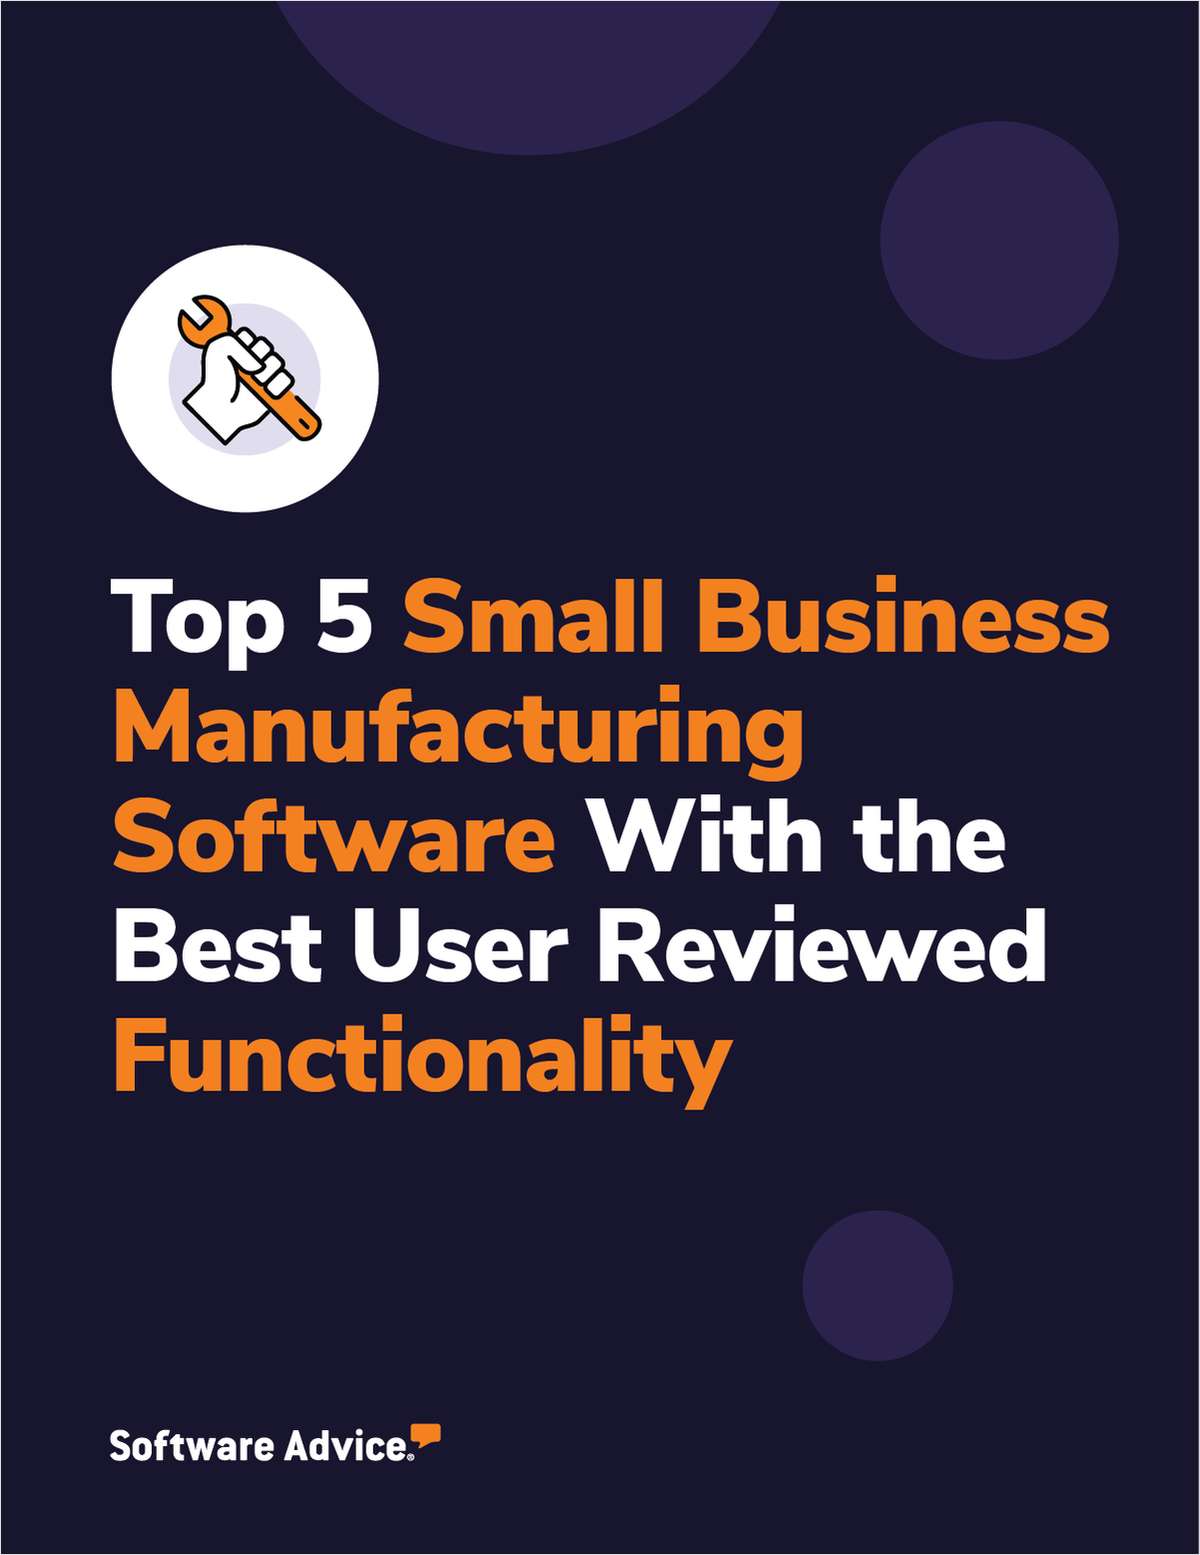 Top 5 Small Business Manufacturing Software With the Best User Reviewed Functionality